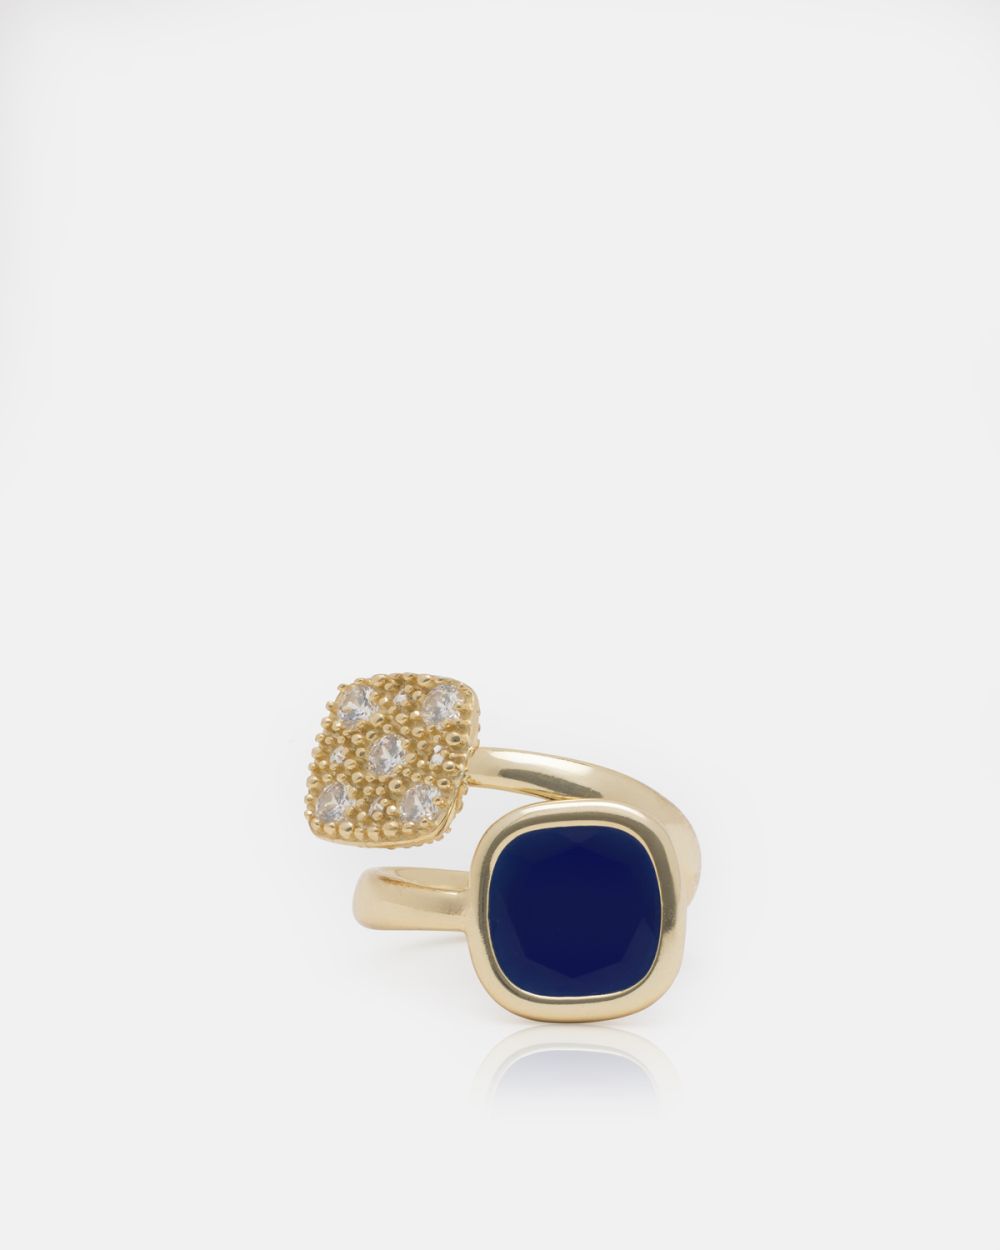 Superb Ring in Gold Plated Silver with Zirconias